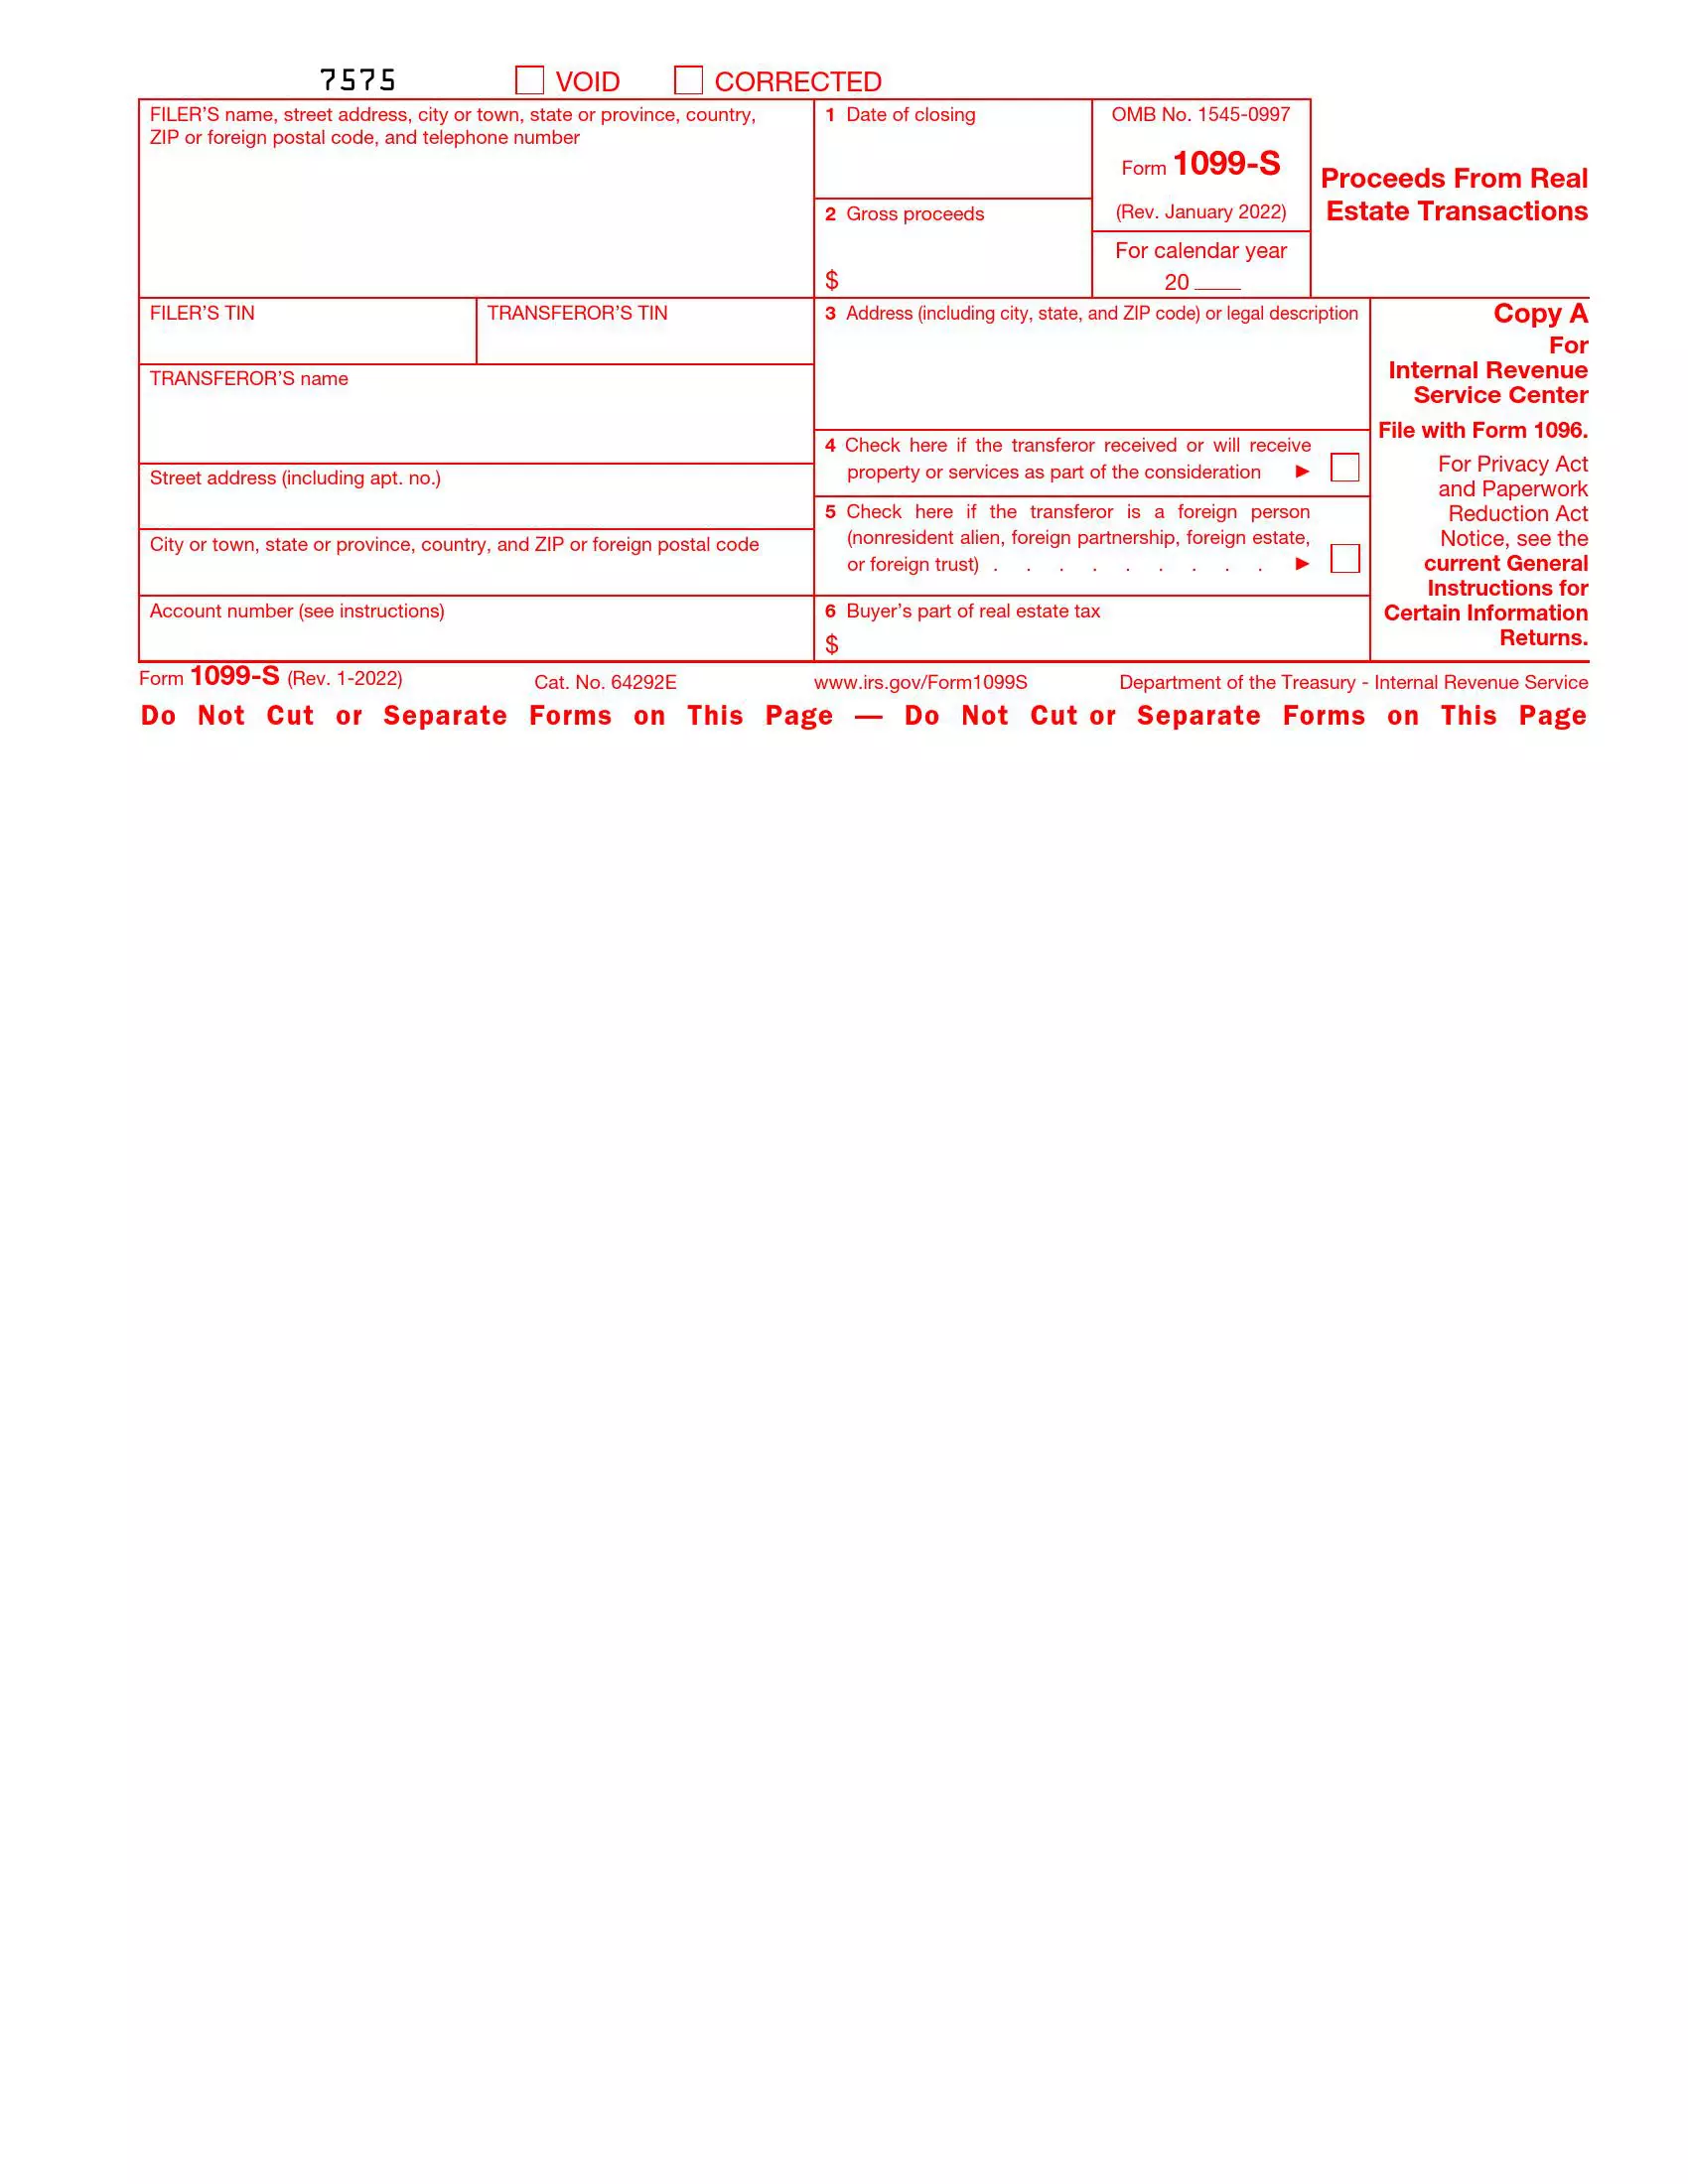 irs form 1099-s rev 01 2022 preview